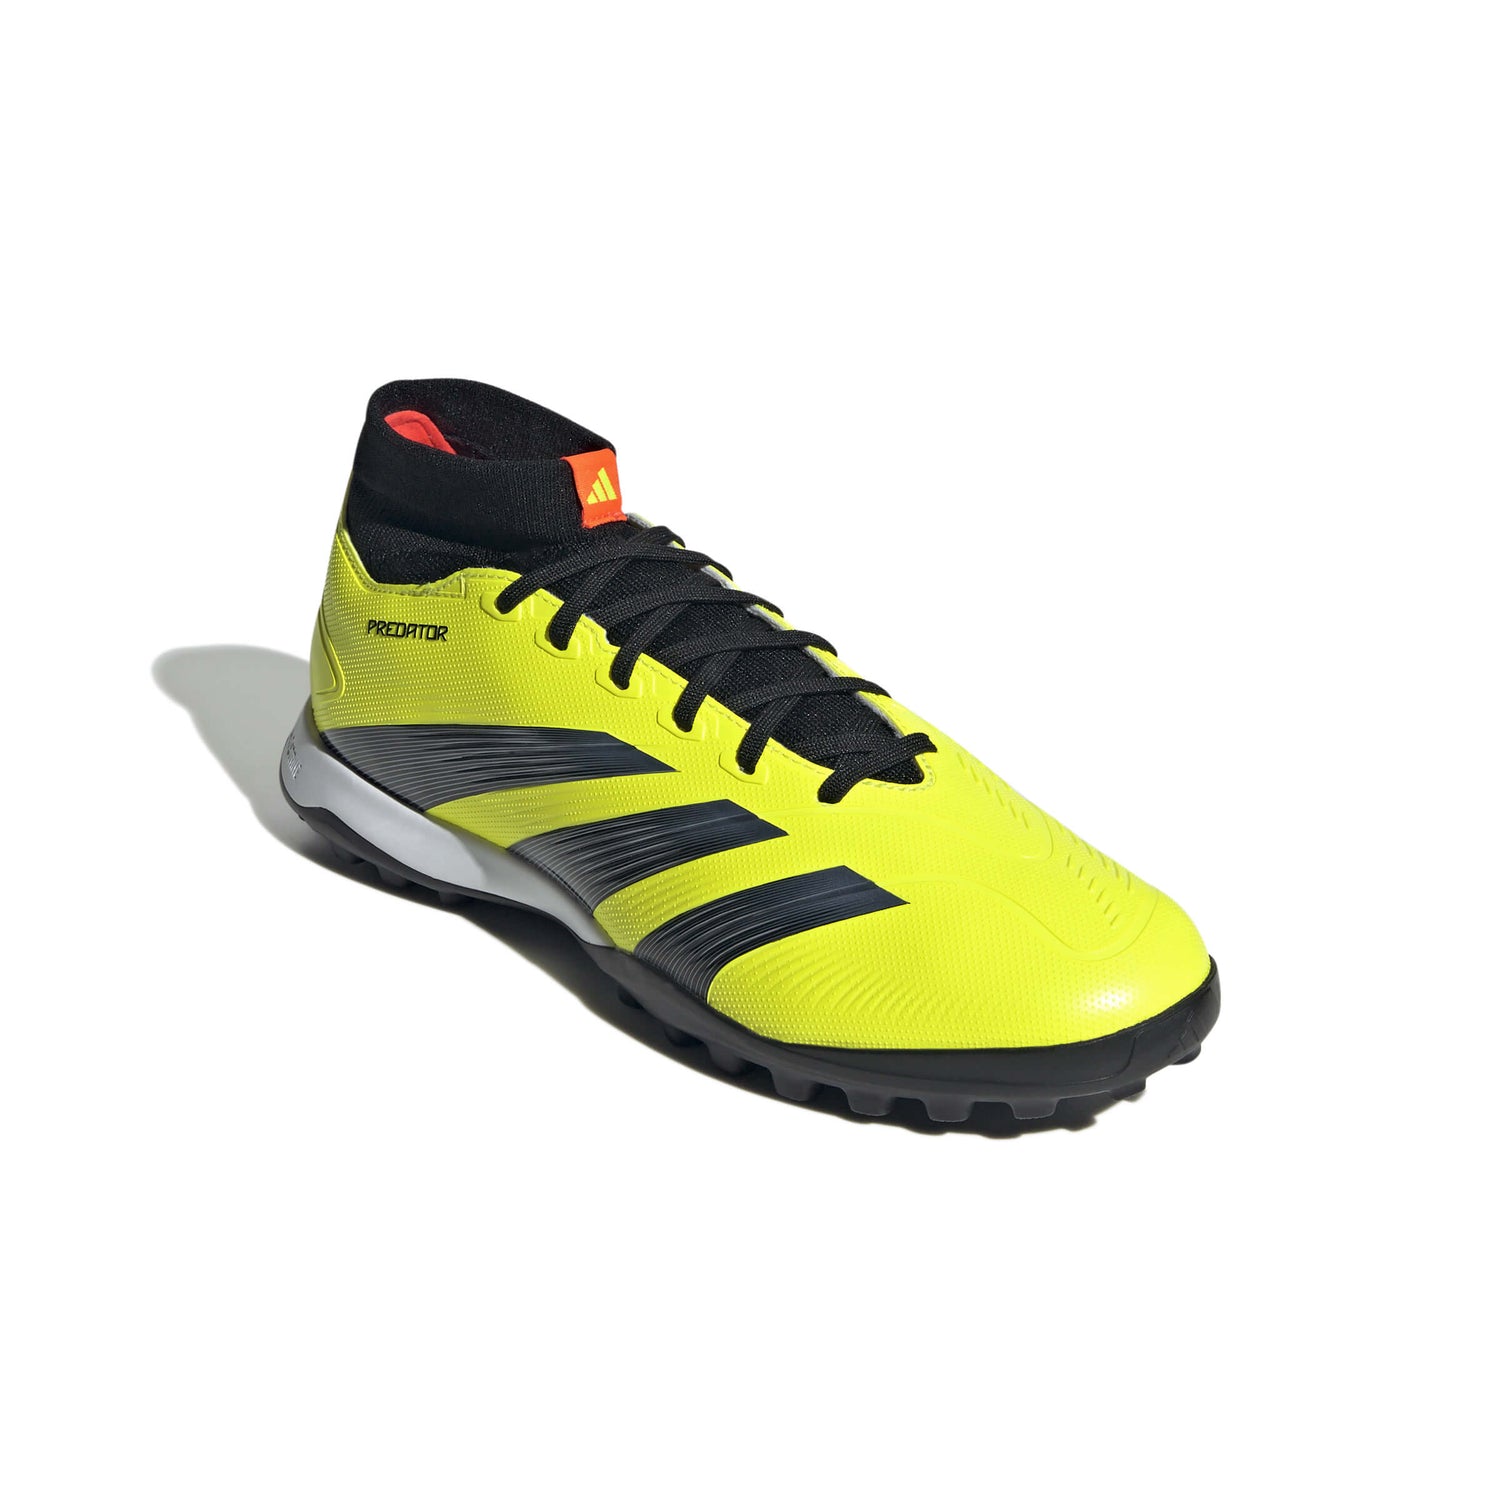 adidas Predator League Sock Turf - Energy Citrus Pack (SP24) (Lateral - Front)